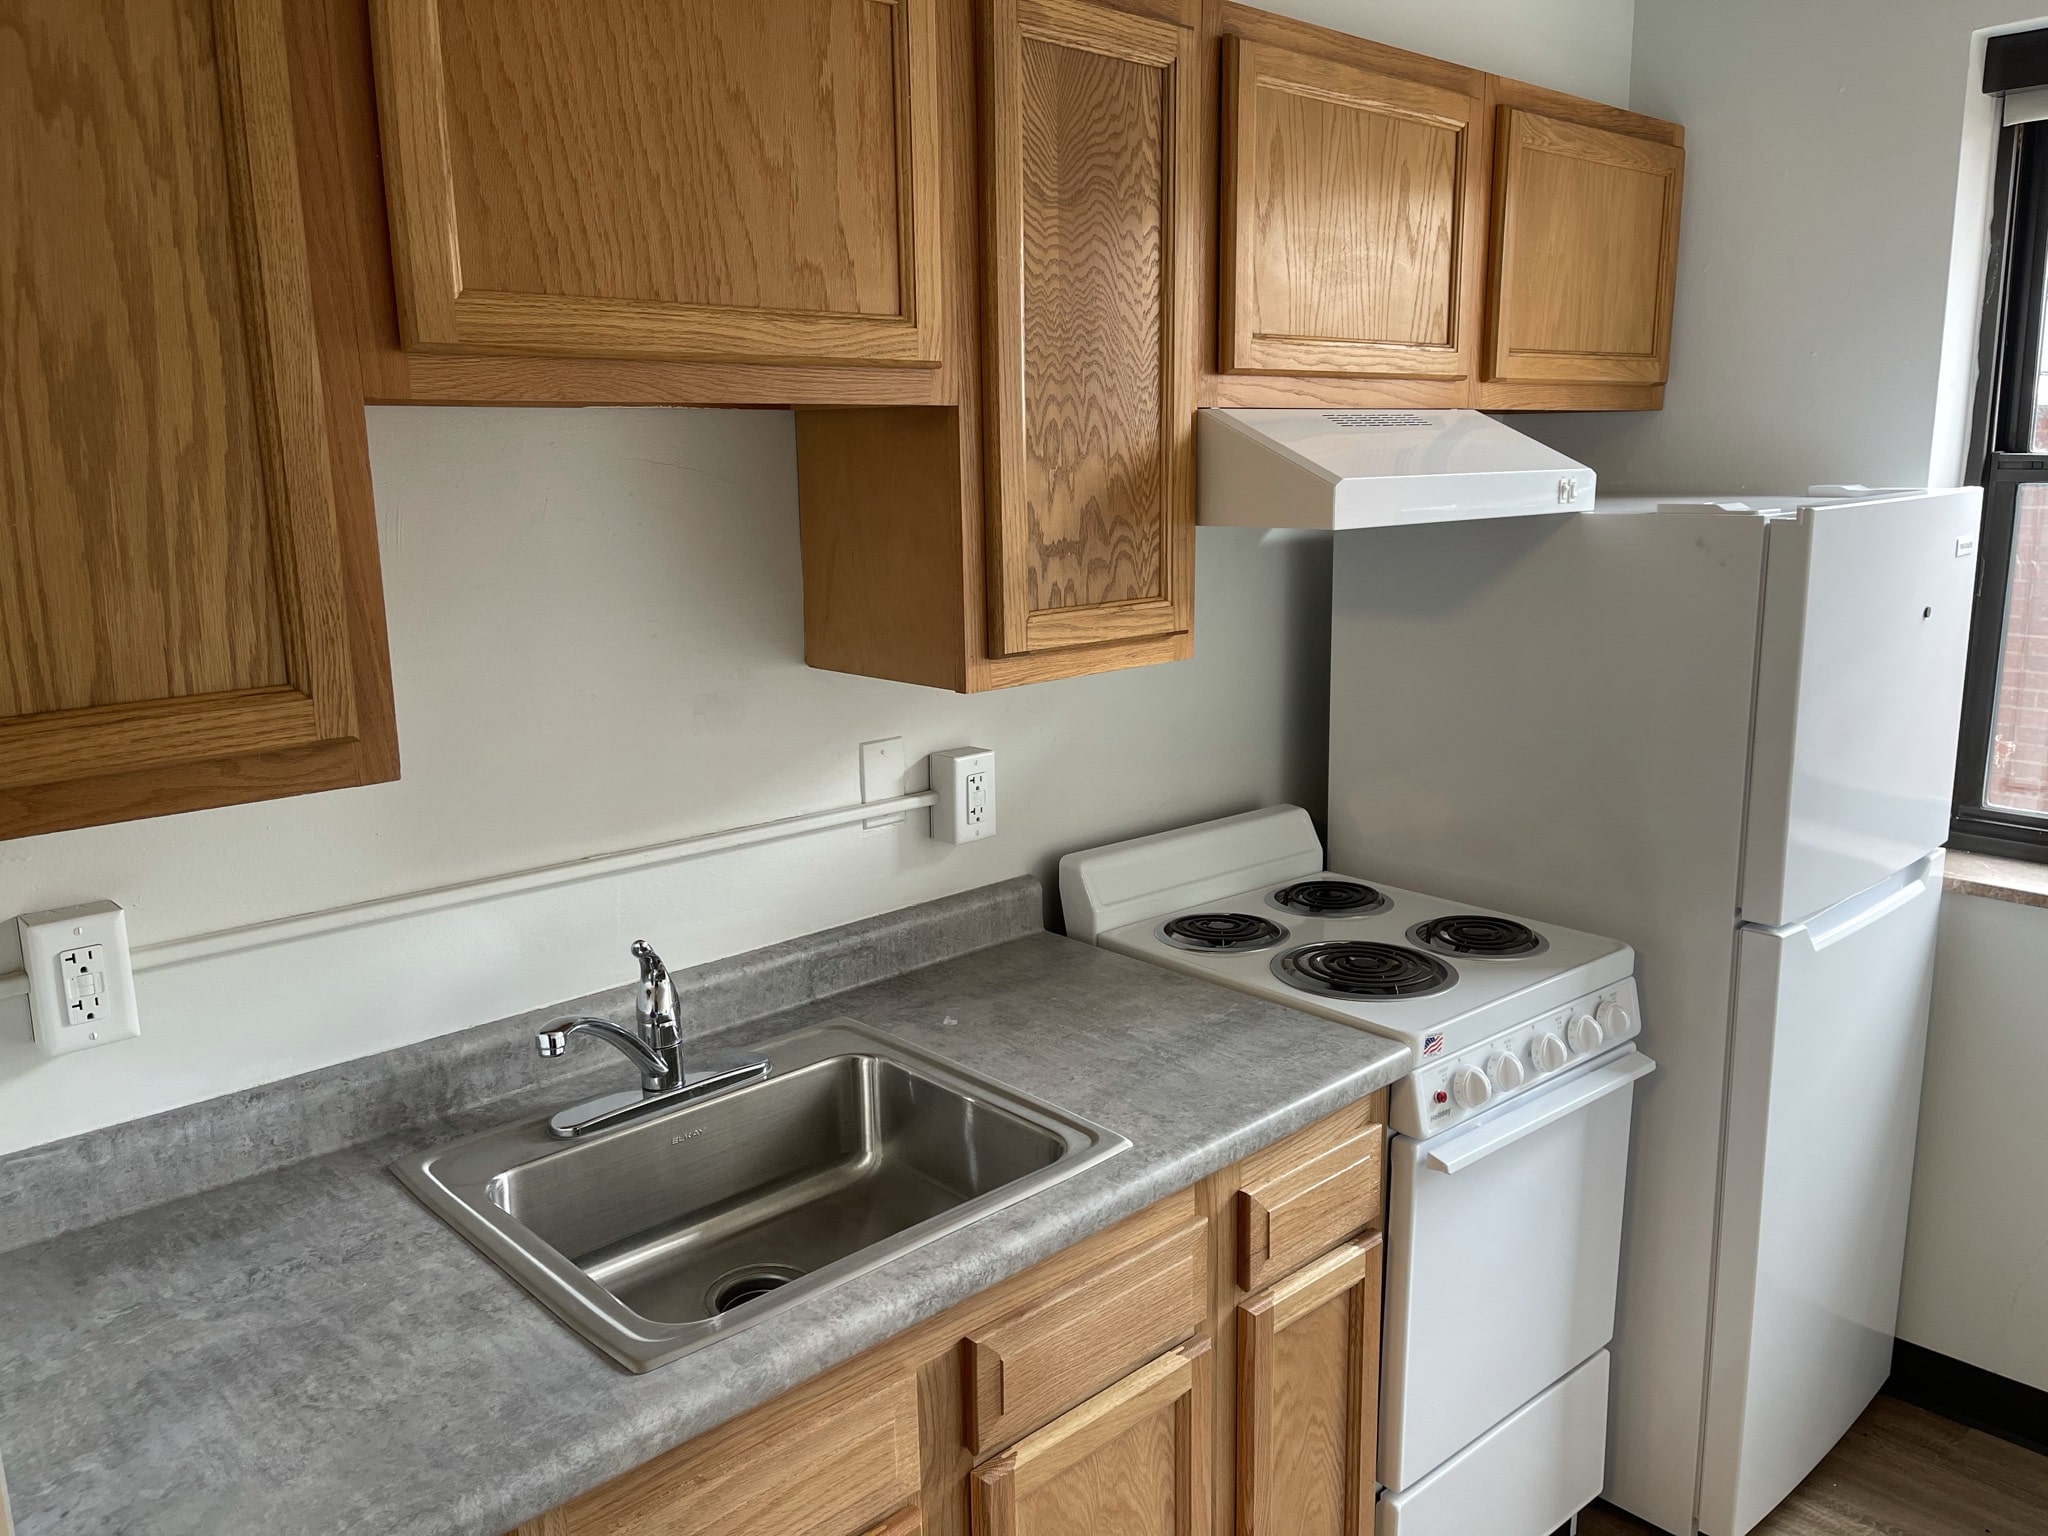 Fifth Neville One bedroom apartment double kitchen - sink, stove, refrigerator and overhead cabinets